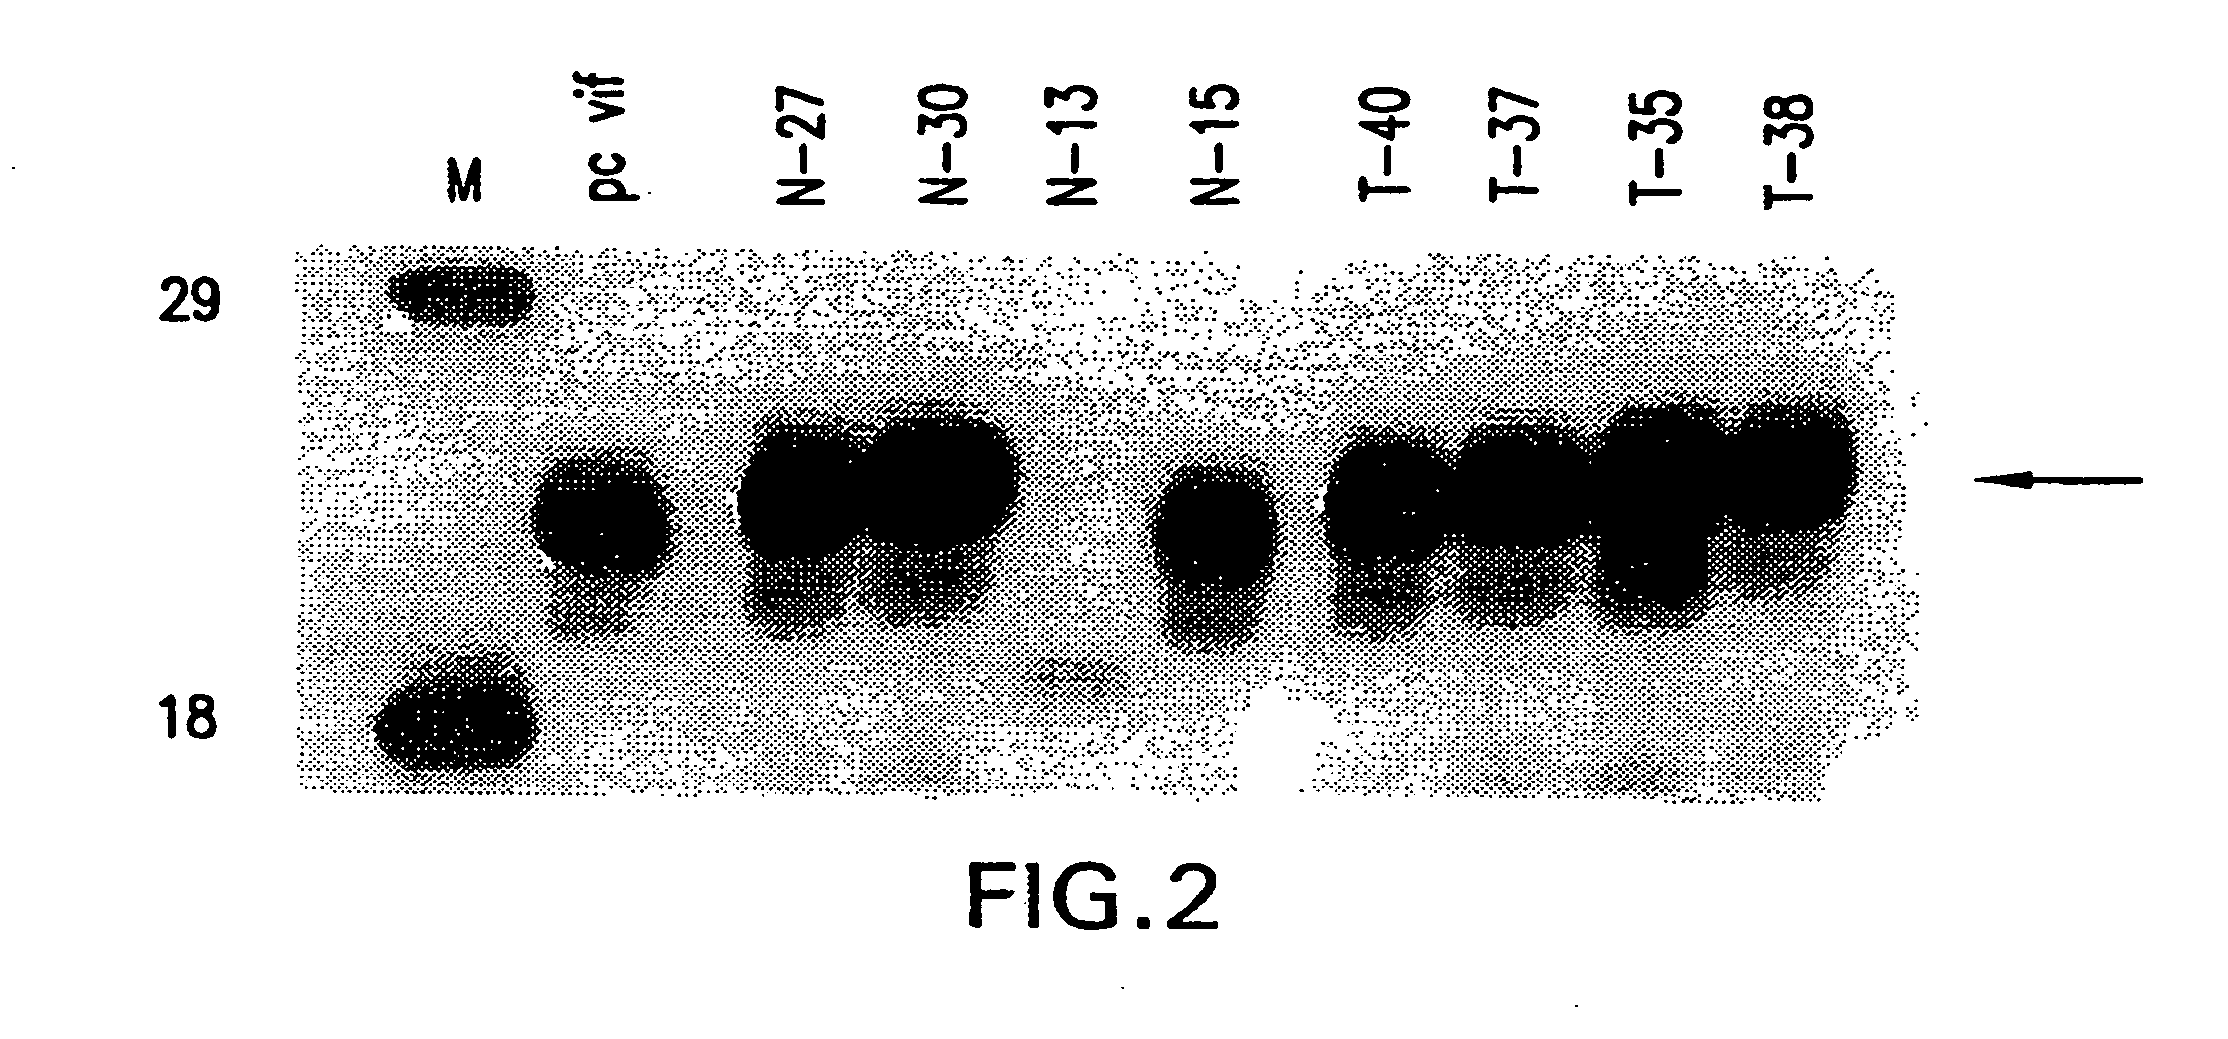 Attenuated vif DNA immunization cassettes for genetic vaccines